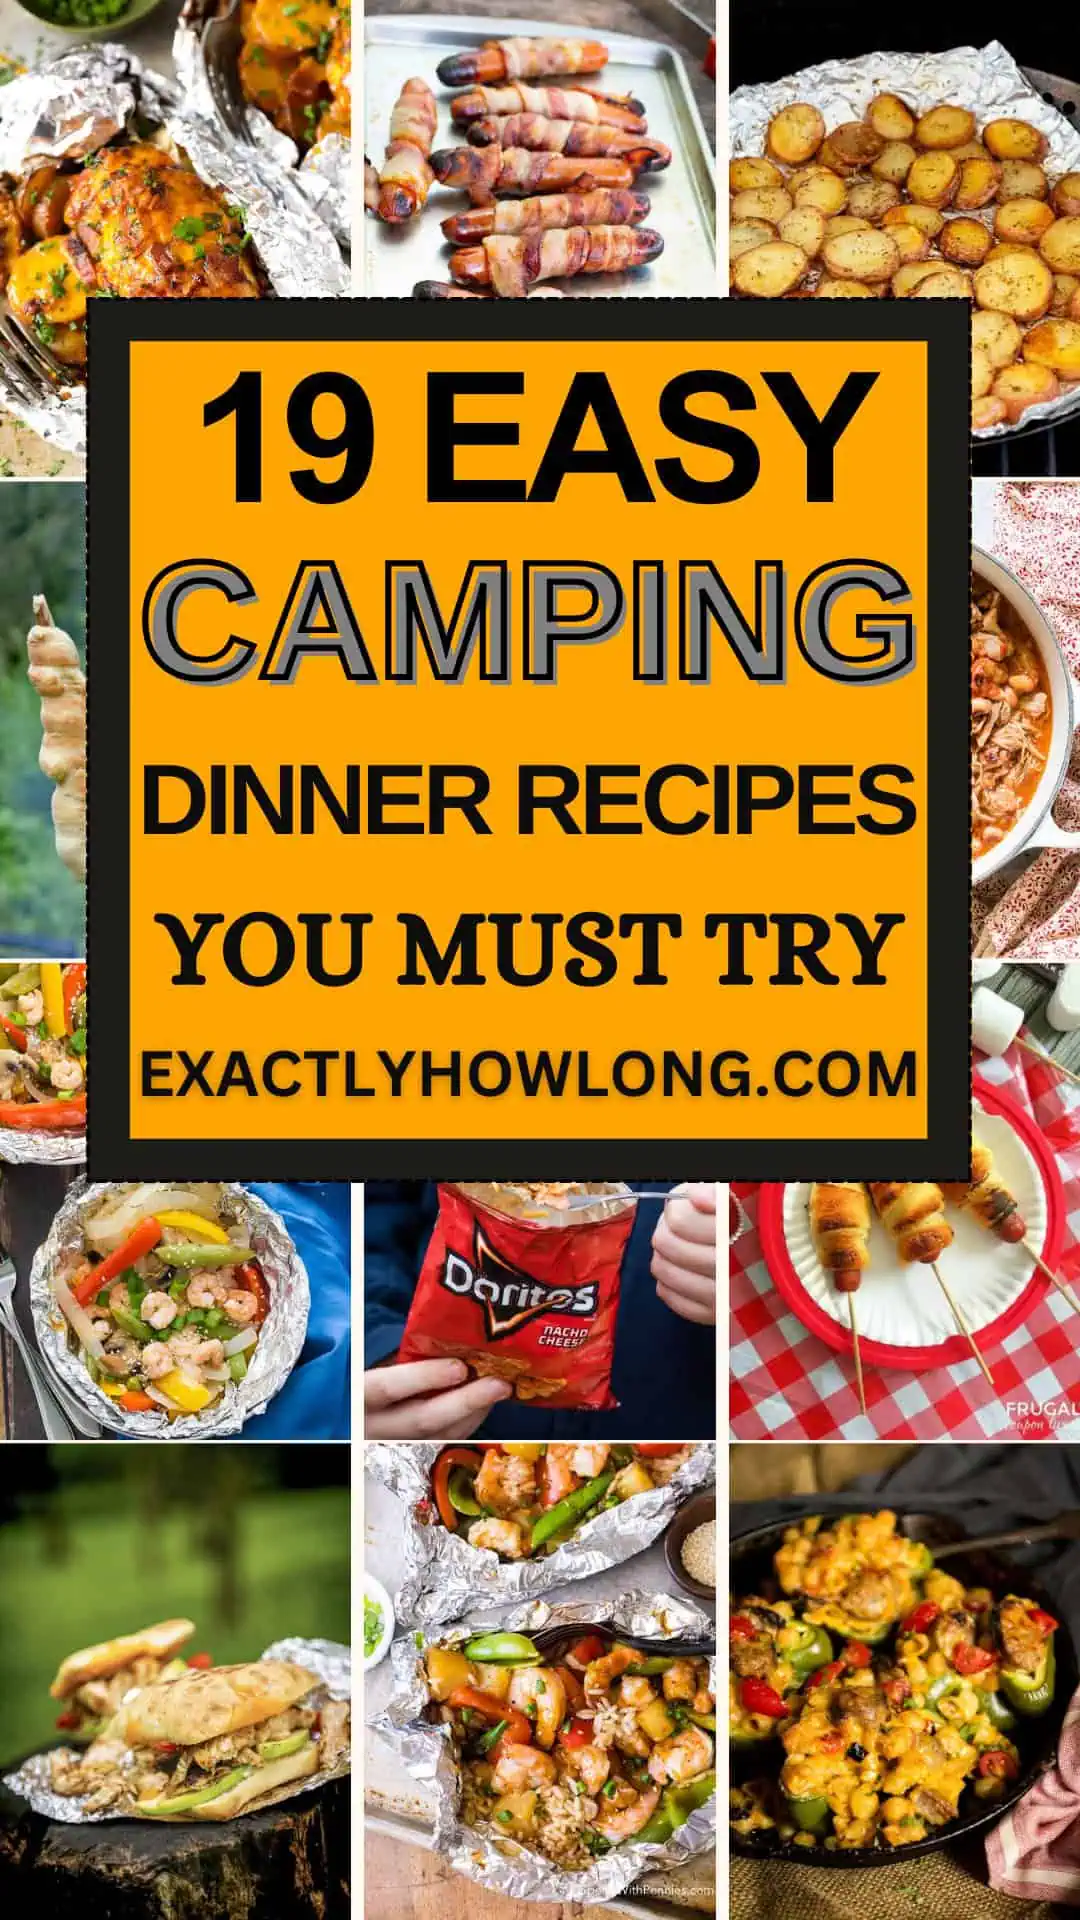 Simple summer camping dinner ideas for large groups with easy outdoor cooking